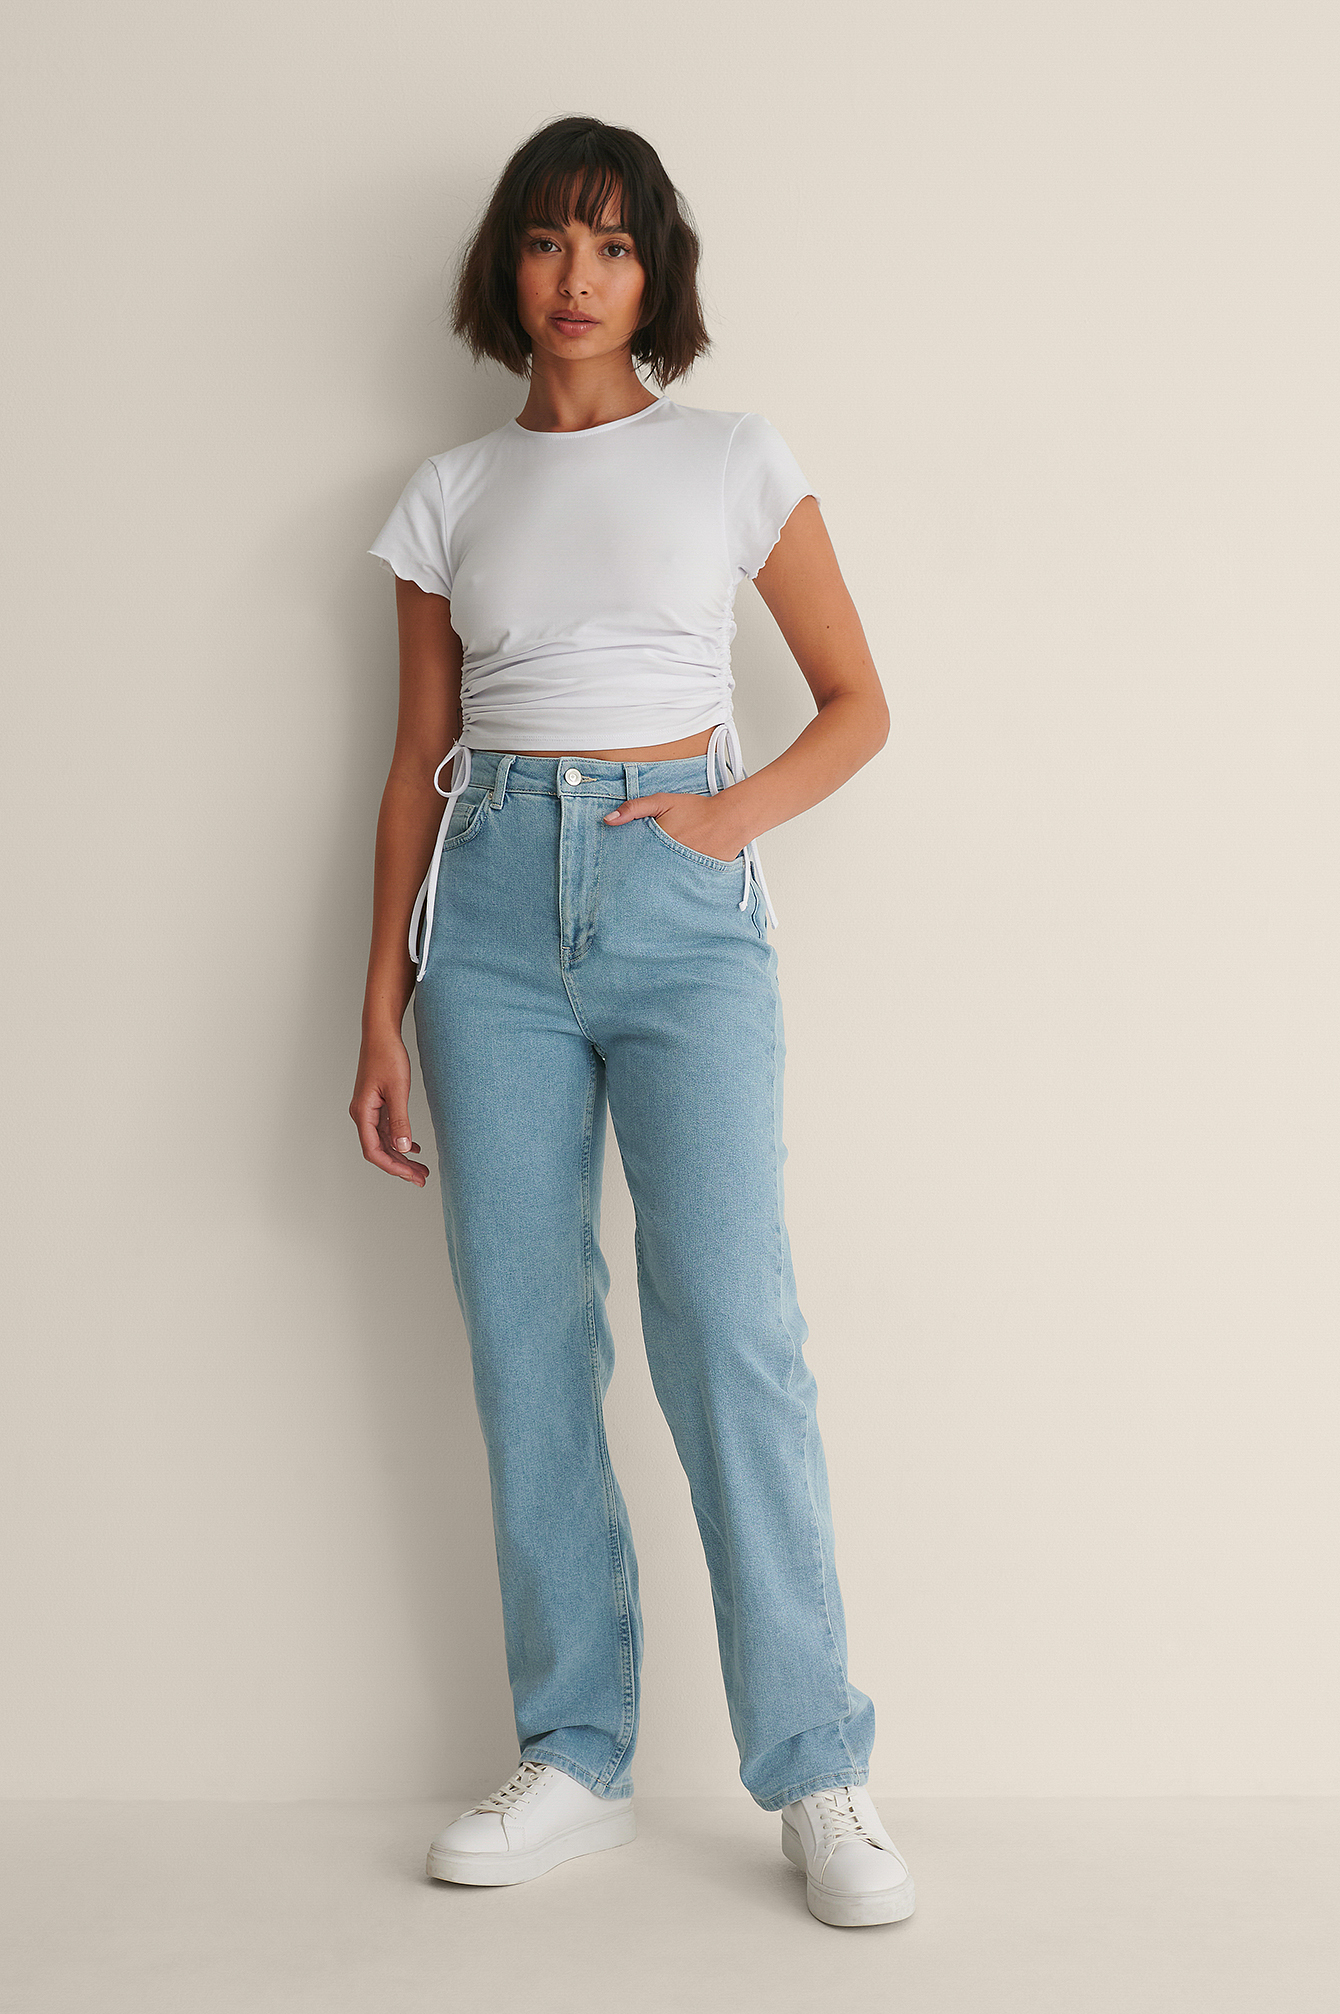 Light Wash Straight Jeans Outfit.